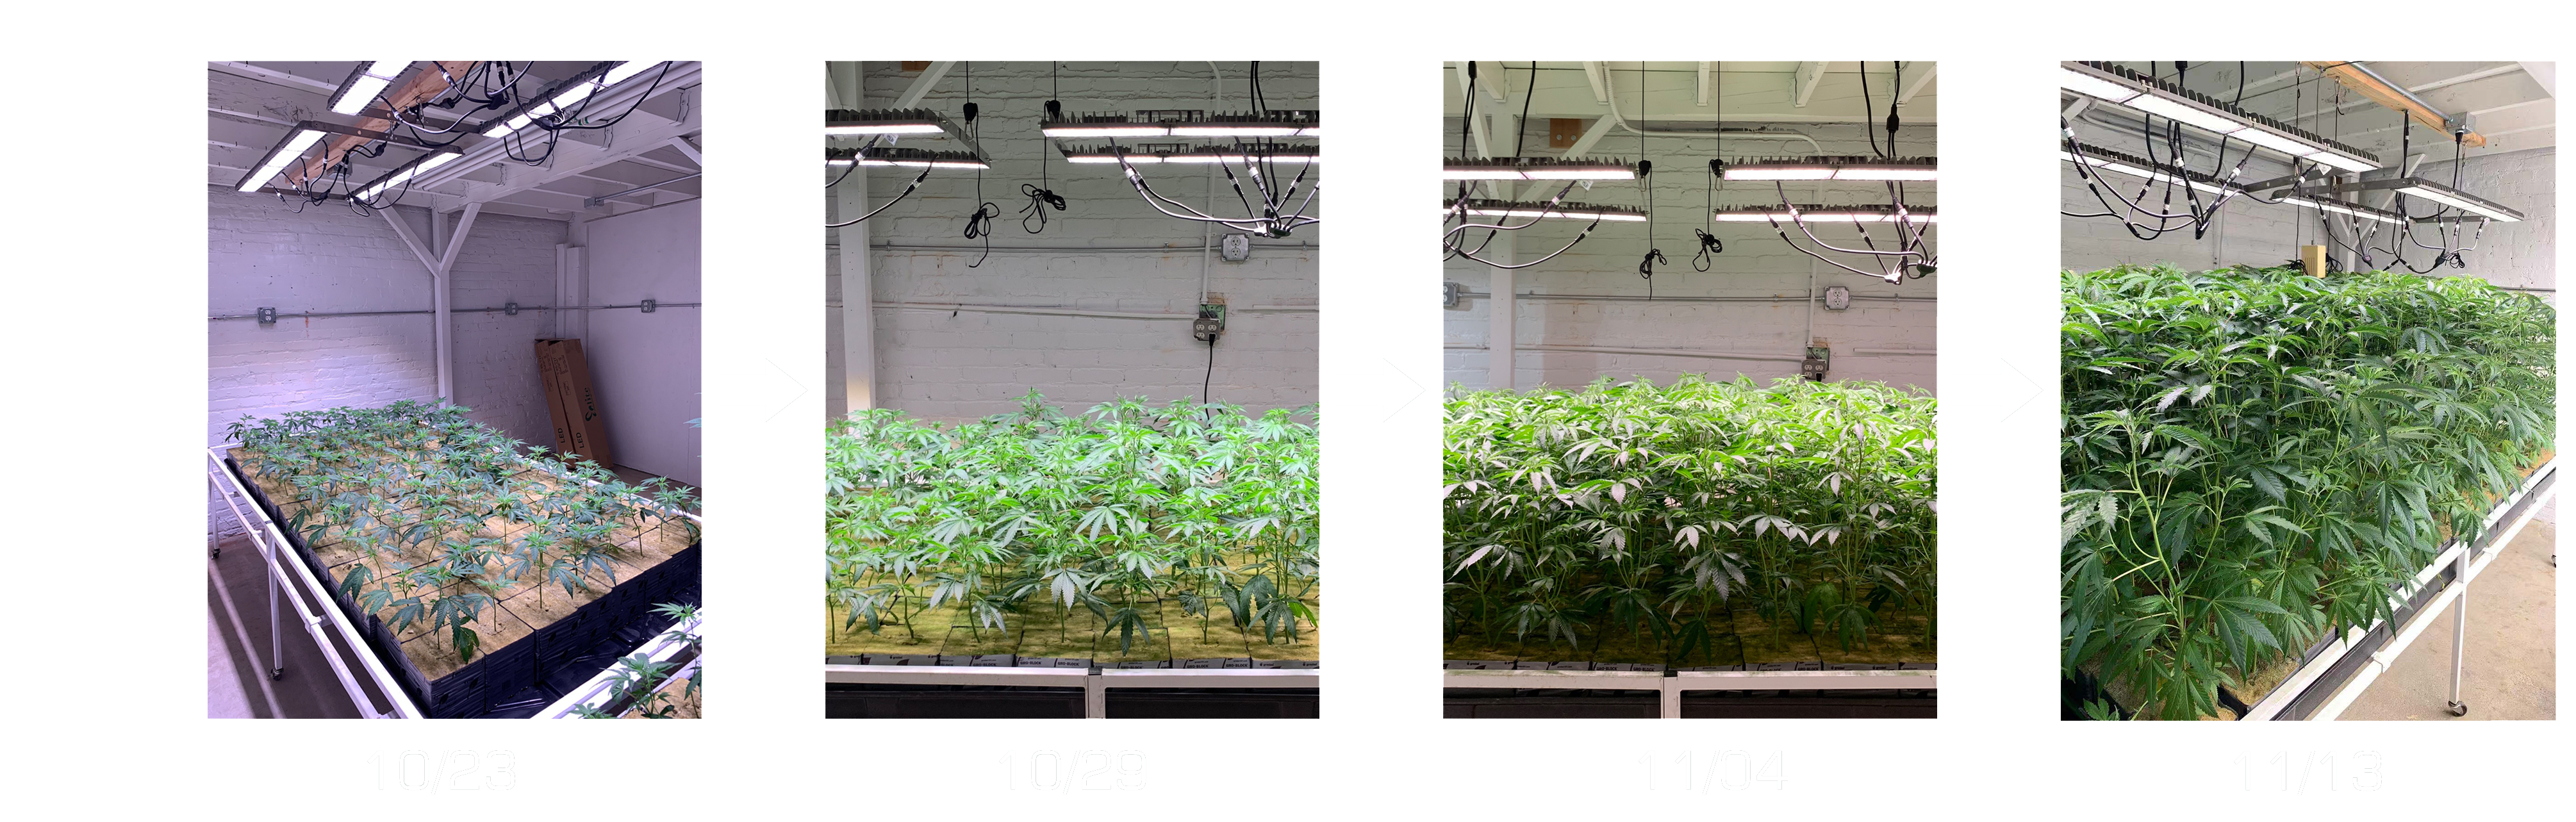 Significant Growing Effects of 50w Grow Light